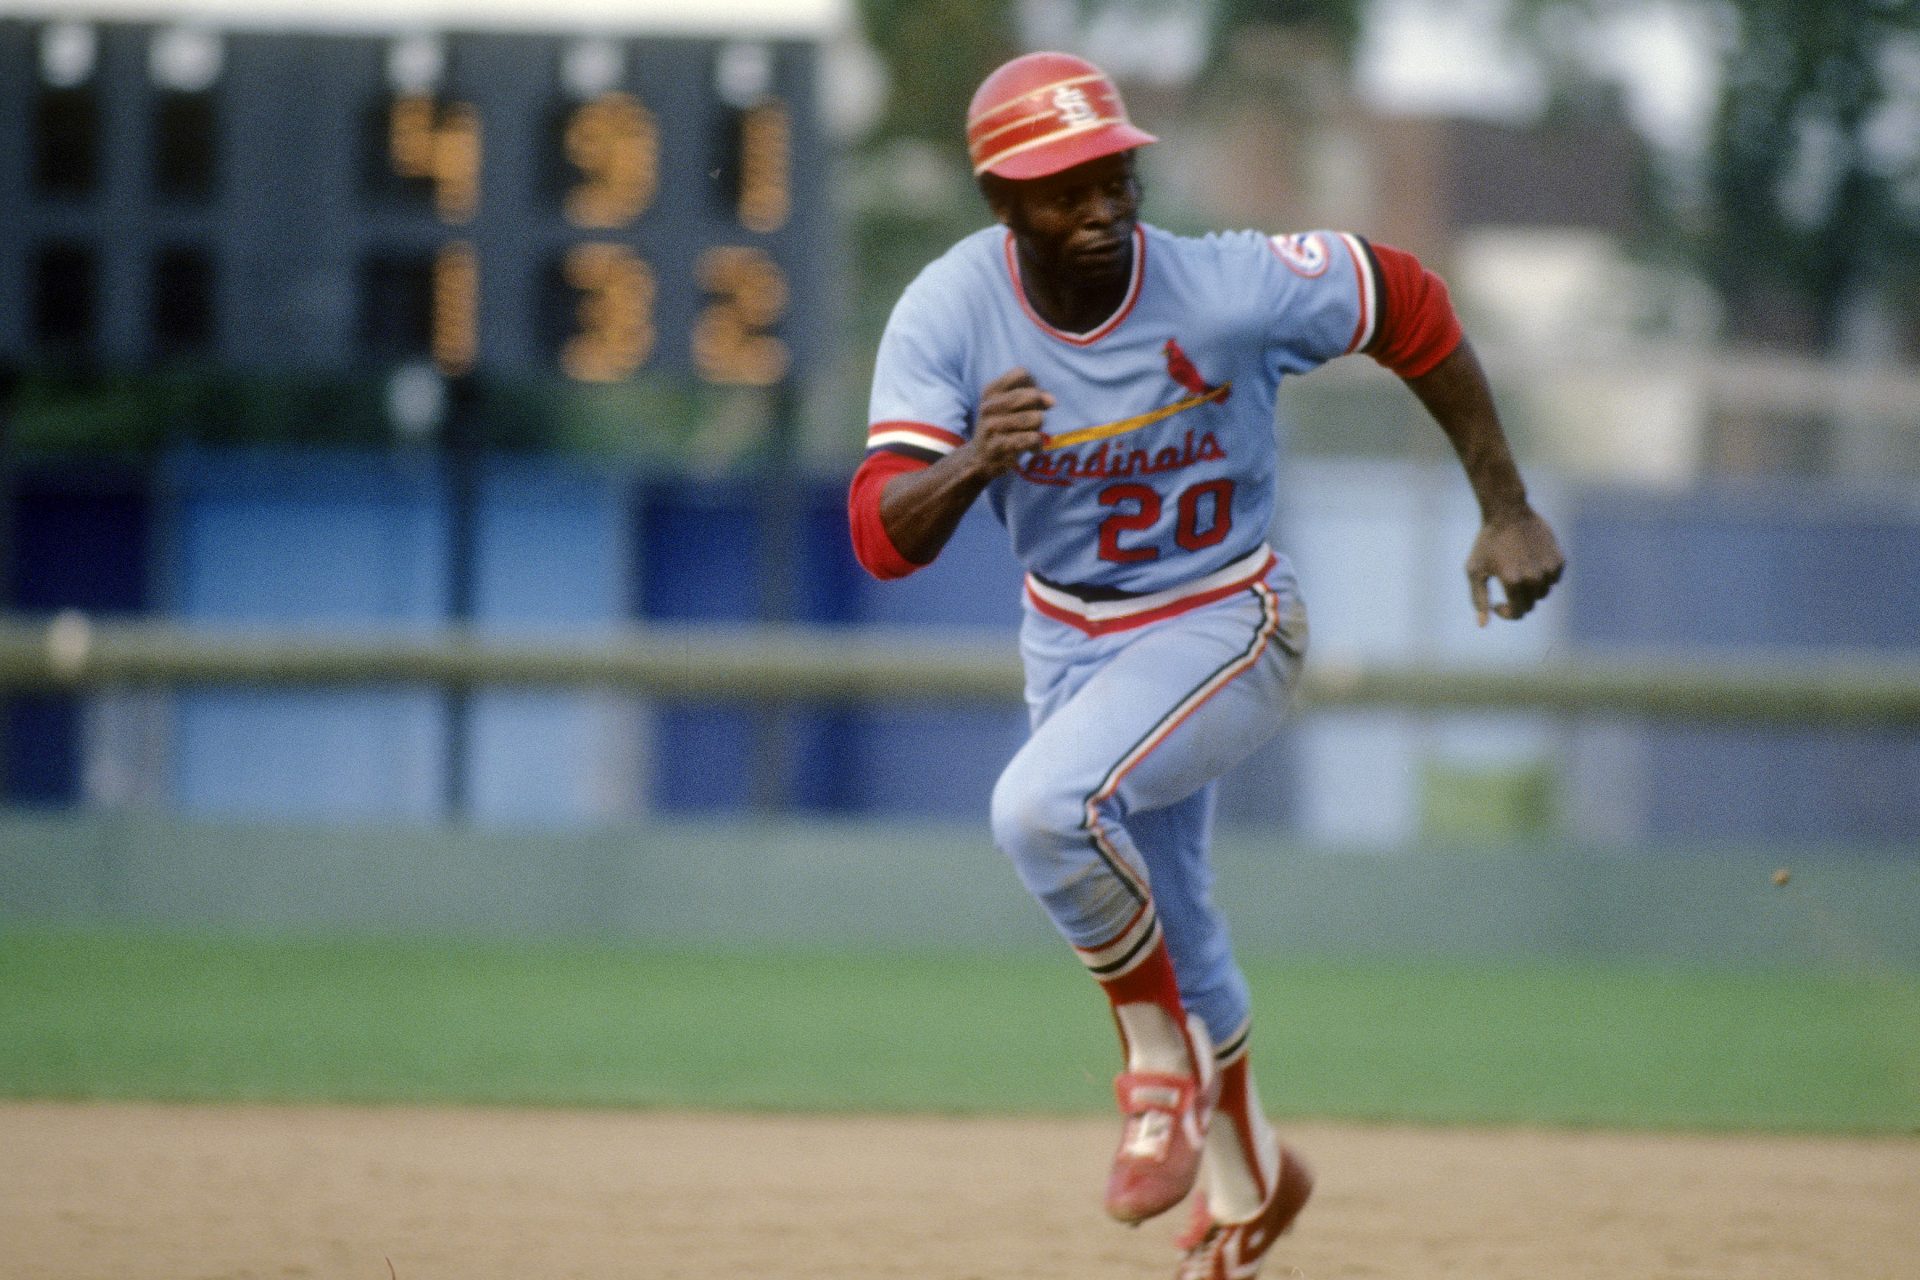 1 - 1964 Chicago Cubs trade Lou Brock to the St. Louis Cardinals